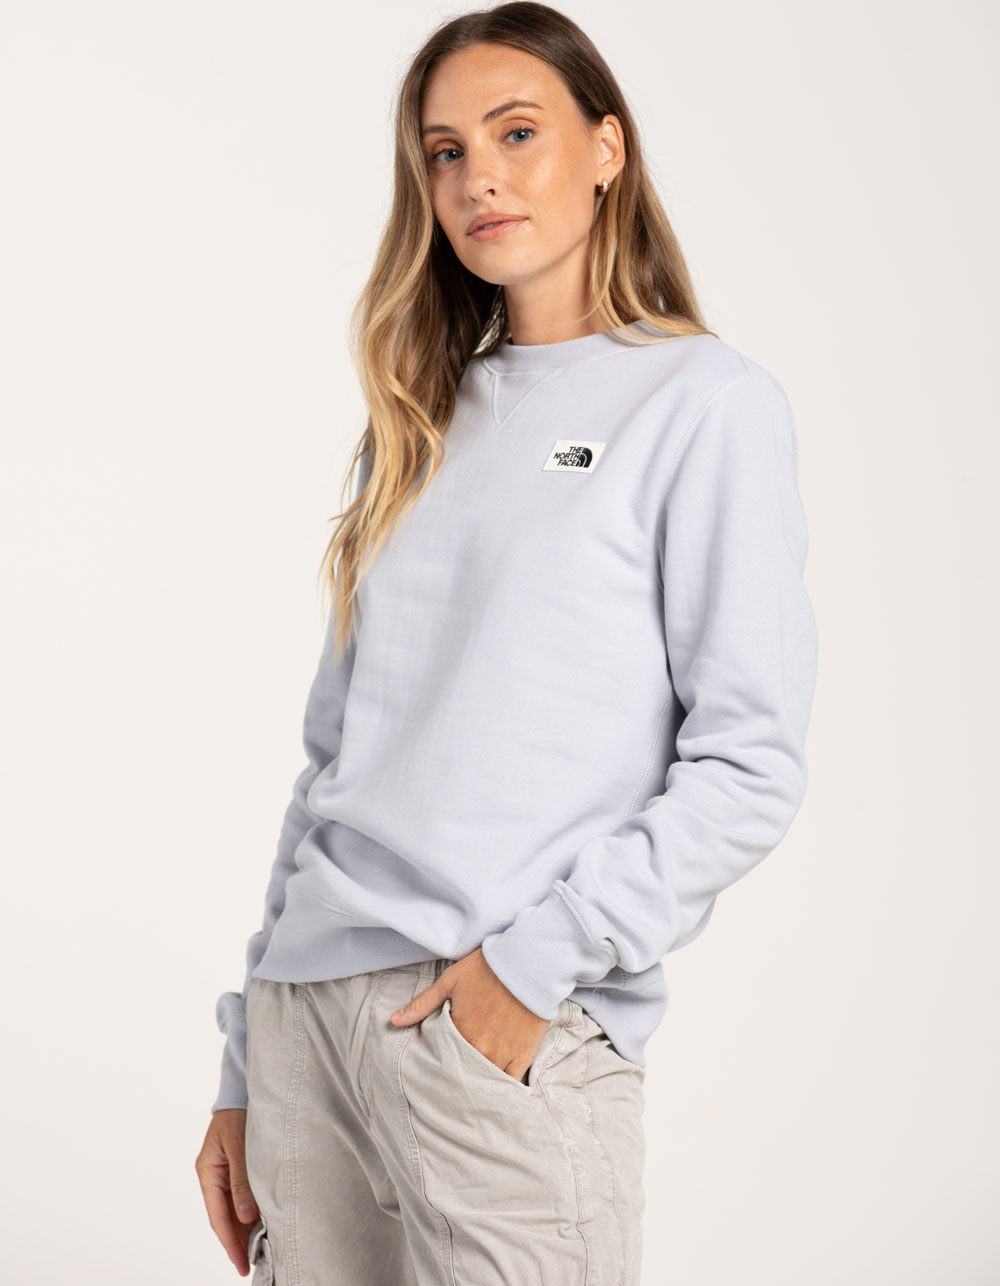 THE NORTH FACE Heritage Patch Womens Crewneck Sweatshirt - PERIWINKLE |  Tillys